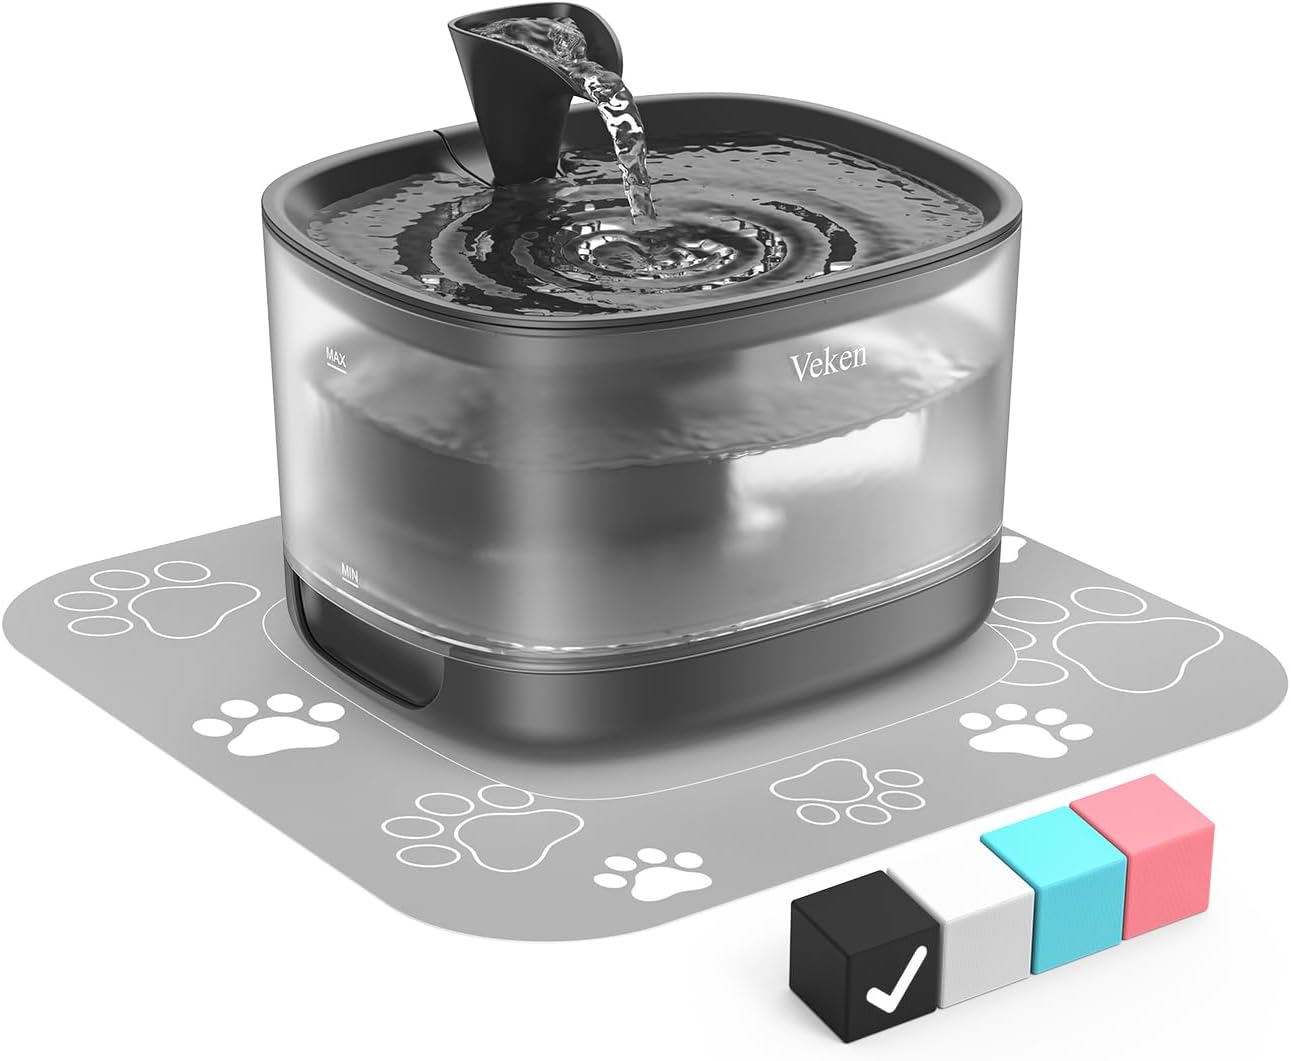 Good product, but follow the filter placement orientation as shown in the instructions. The channels between both charcoal sections needs to be facing left/right. See review photo. Otherwise the water draining will restrict itself too much around the filter and make the tray overflow onto the floor.